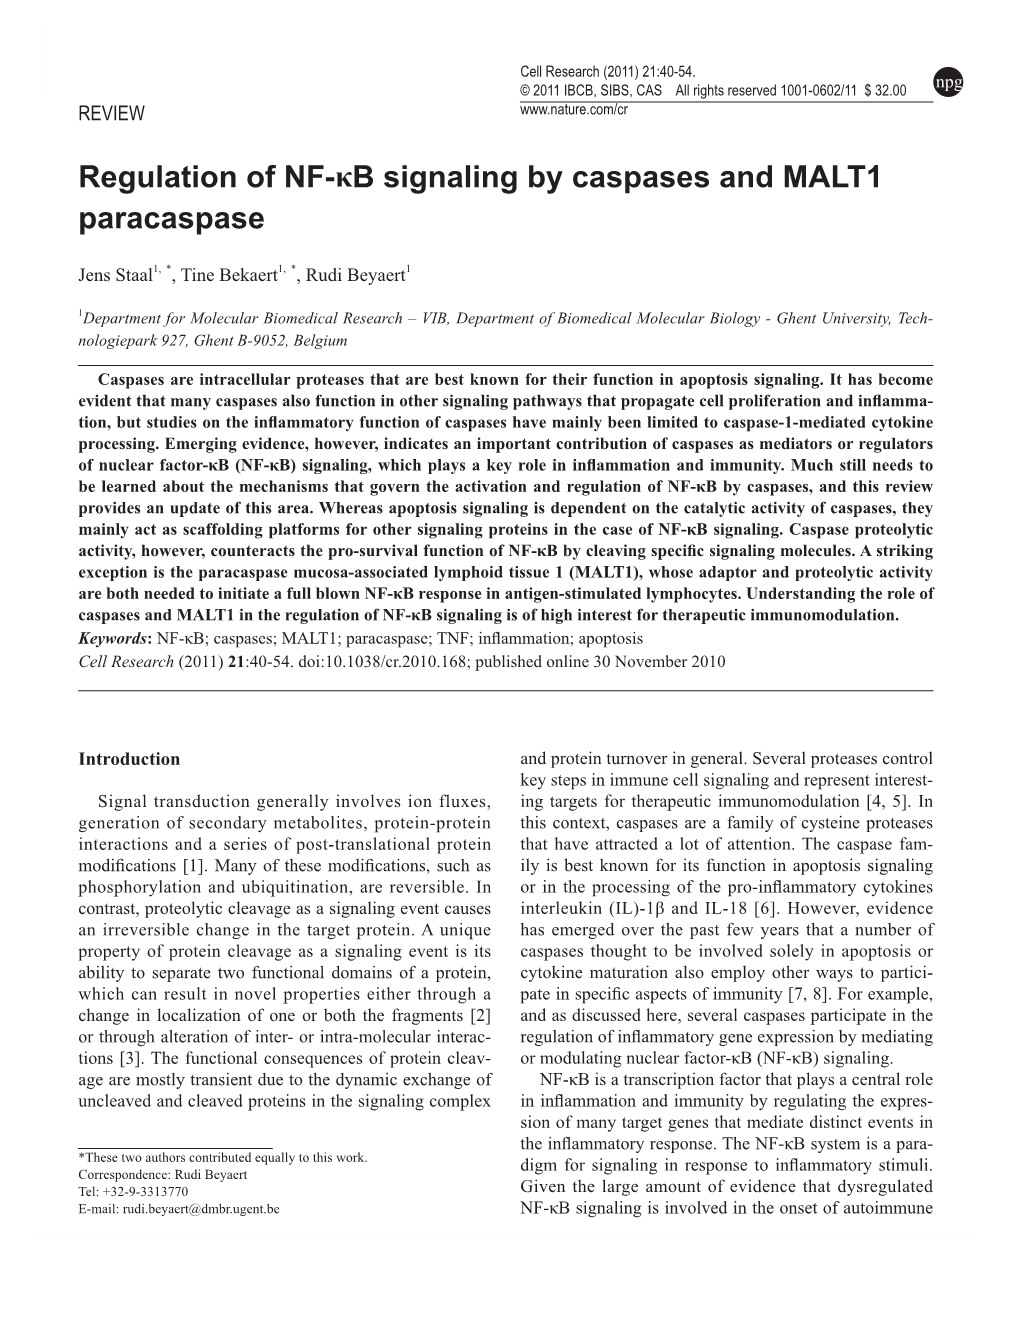 Regulation of NF-Κb Signaling by Caspases and MALT1 Paracaspase